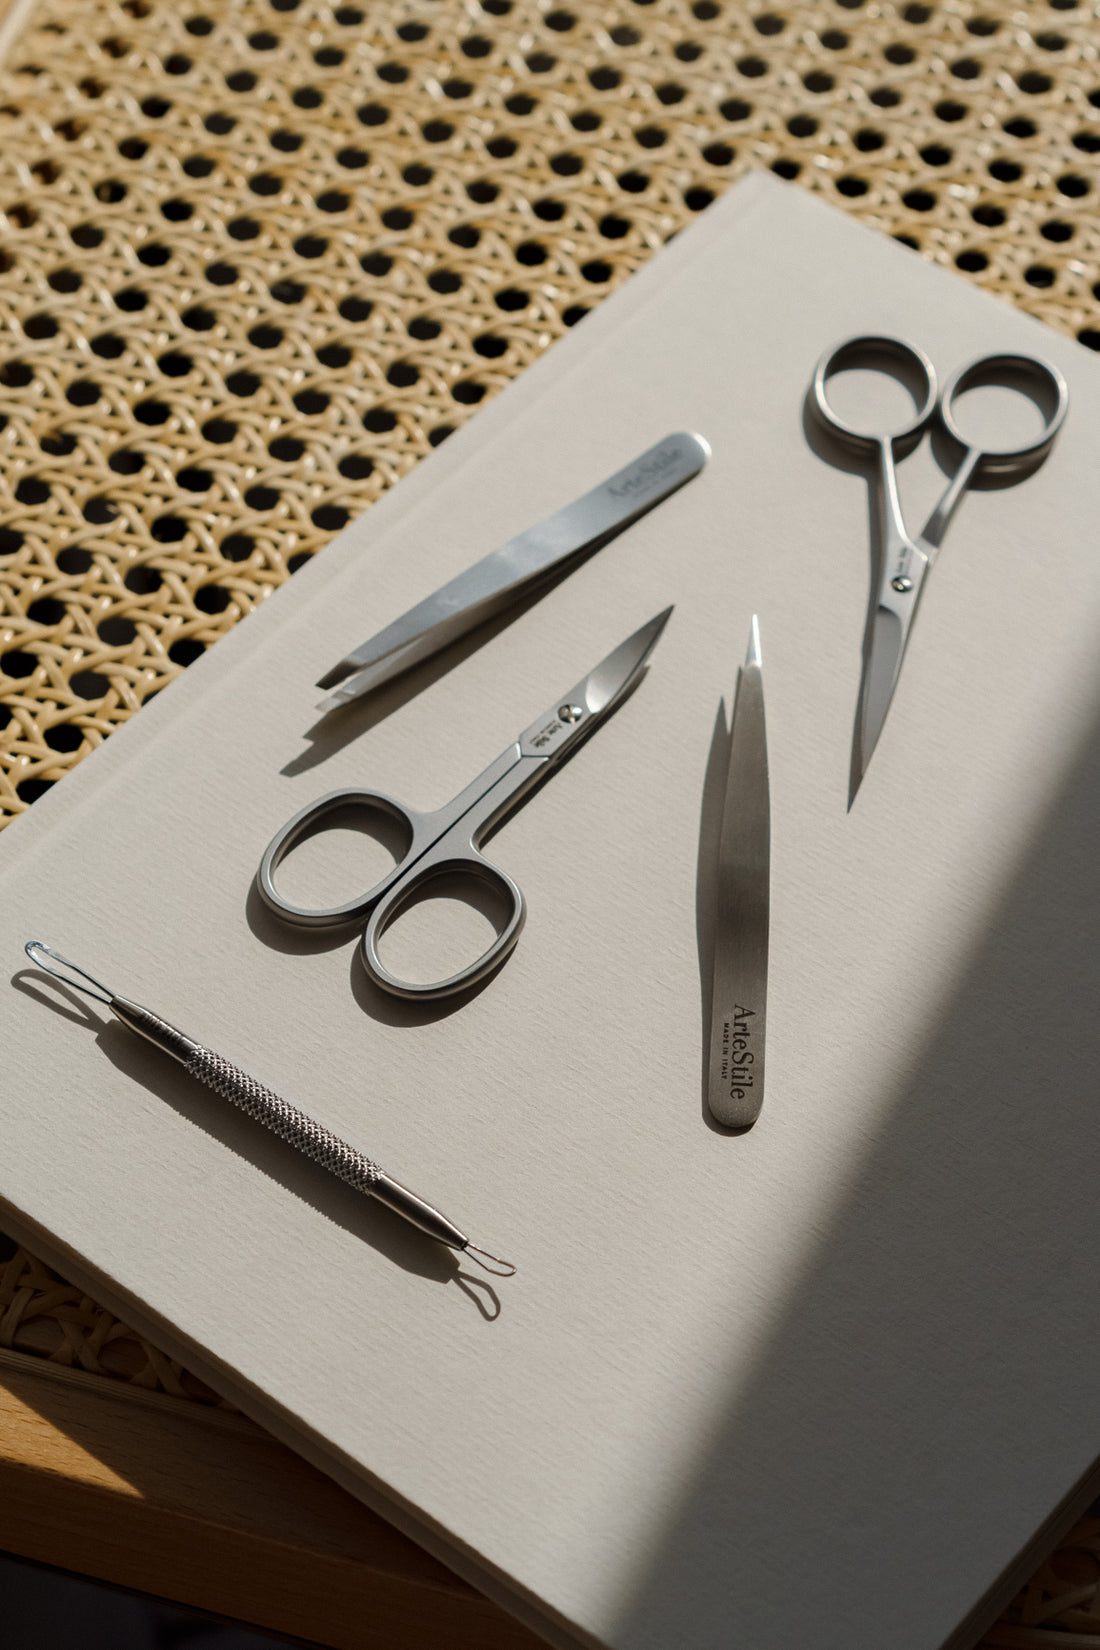 The Top 4 Reasons You Need Point Tip Tweezers In Your Life